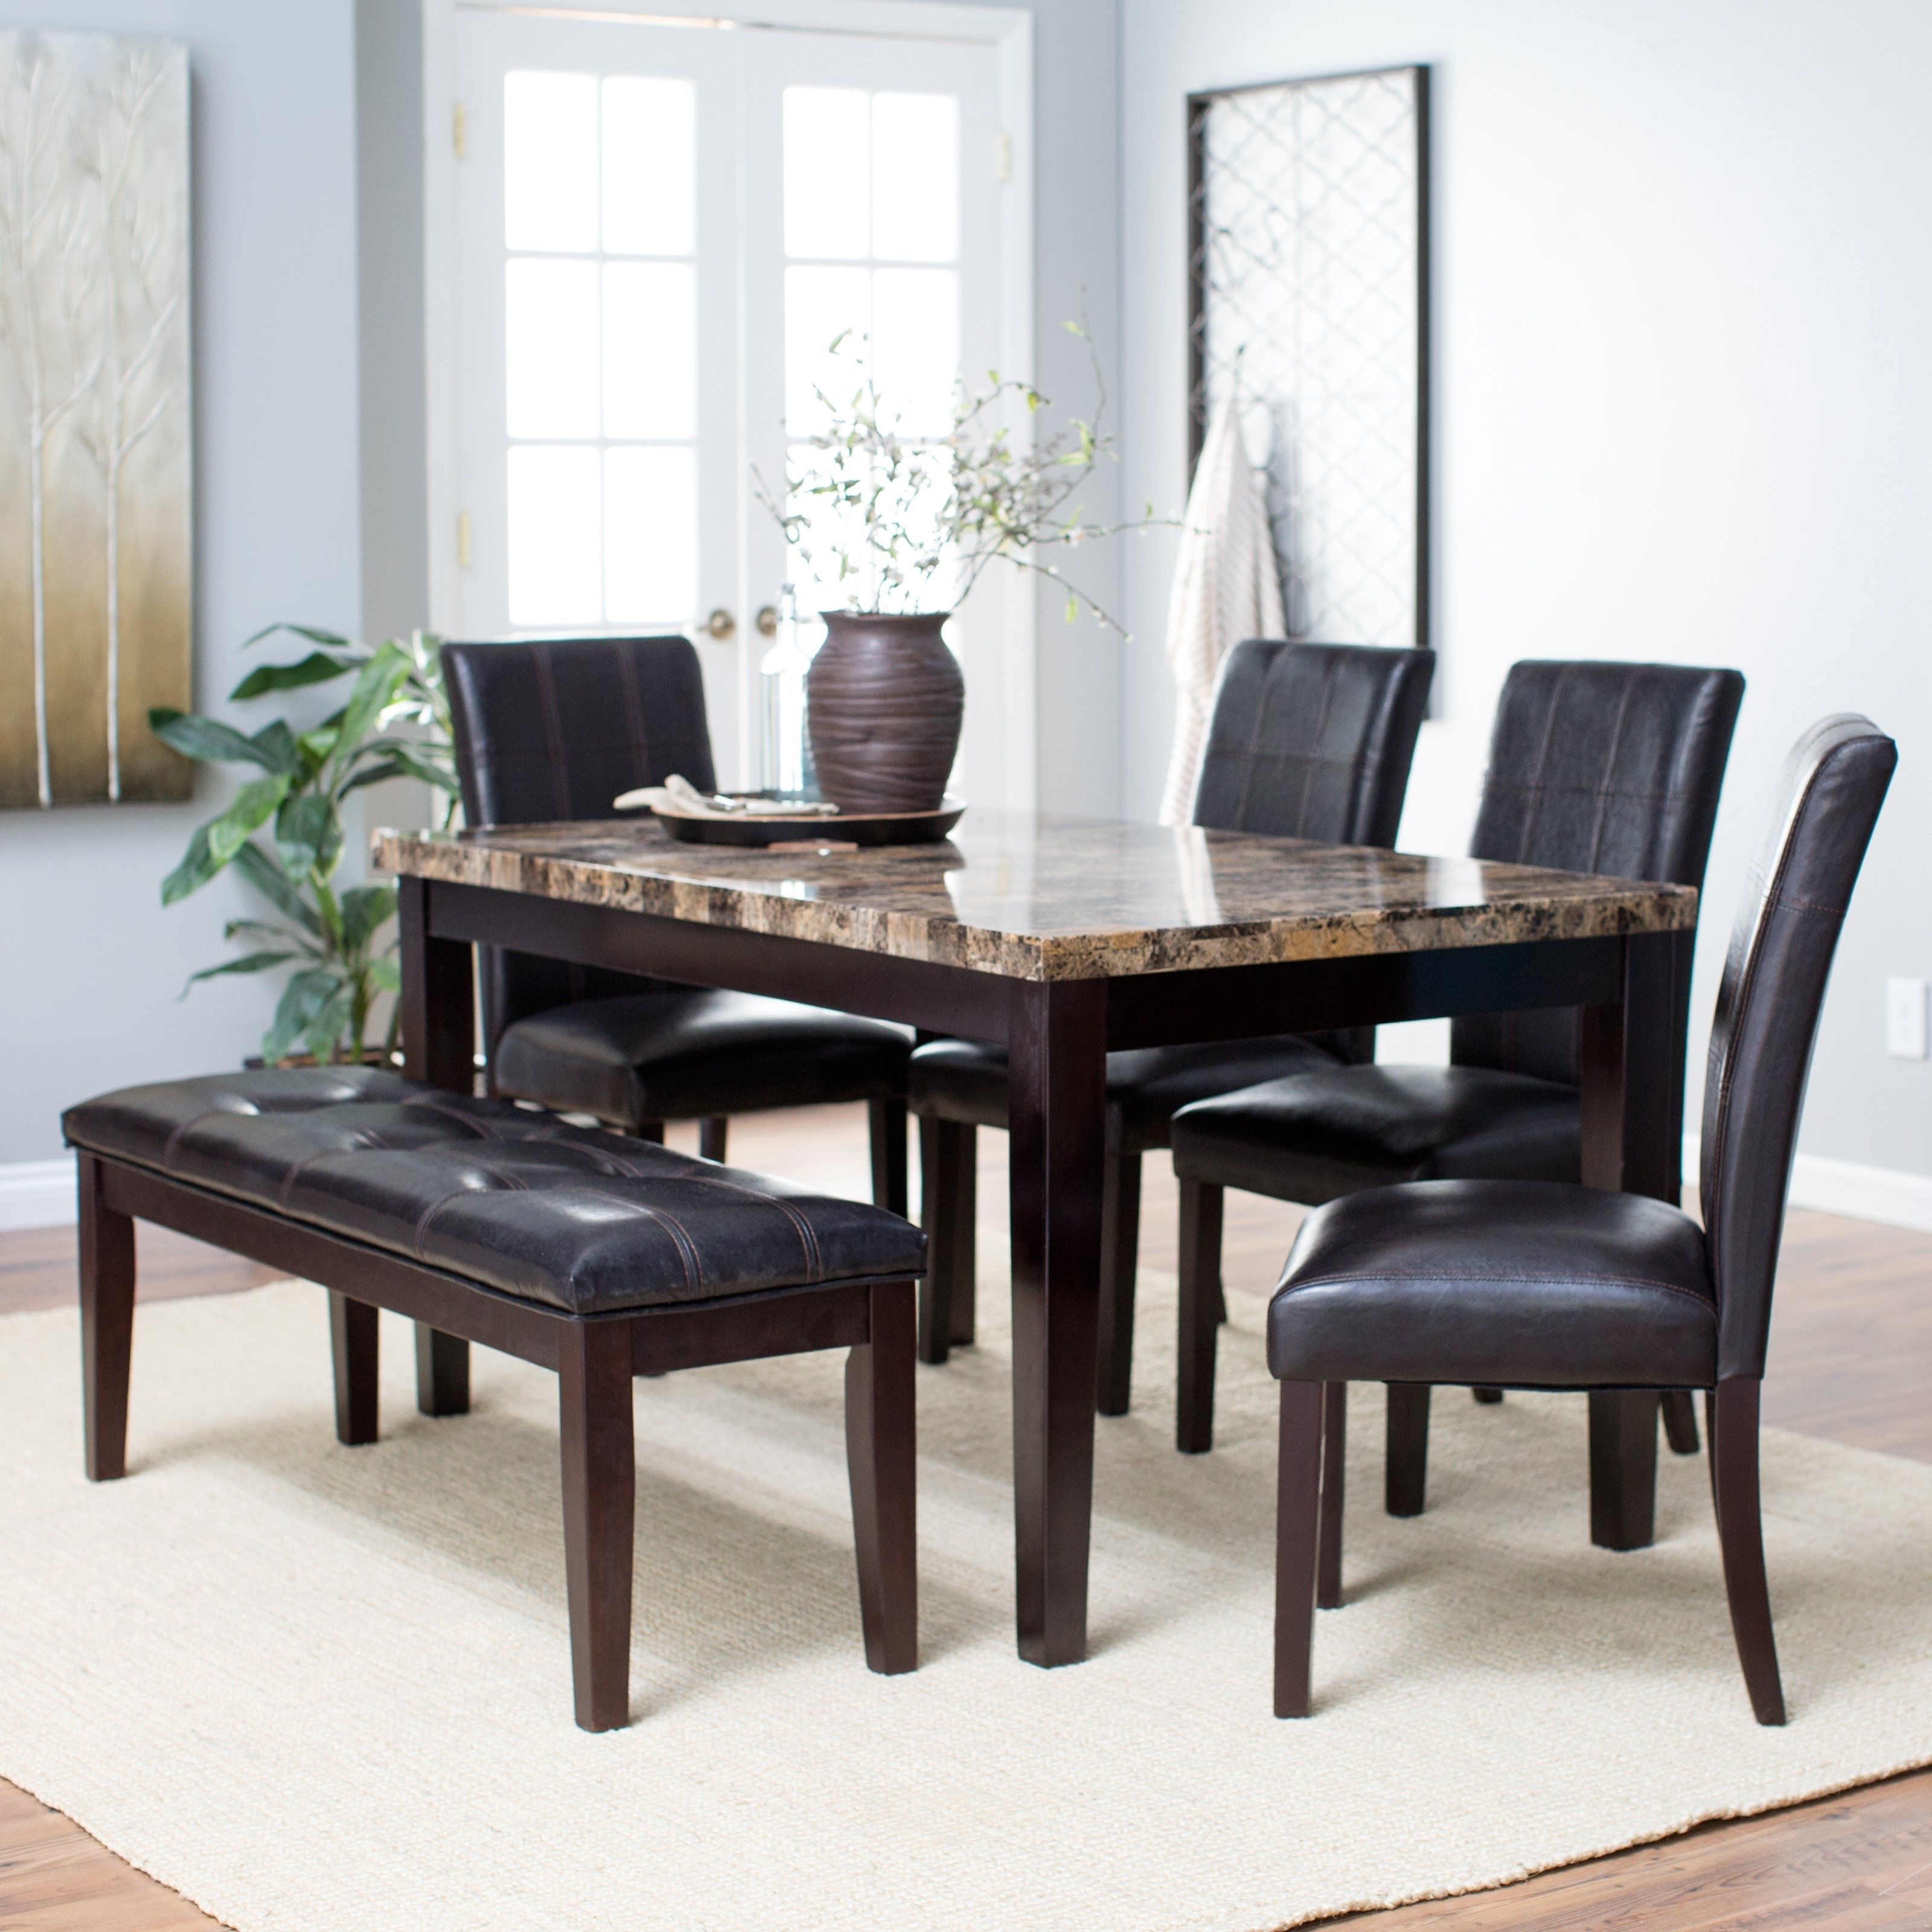 Finley Home Palazzo 6 Piece Dining Set With Bench | Hayneedle Intended For Most Popular Palazzo Rectangle Dining Tables (View 3 of 20)